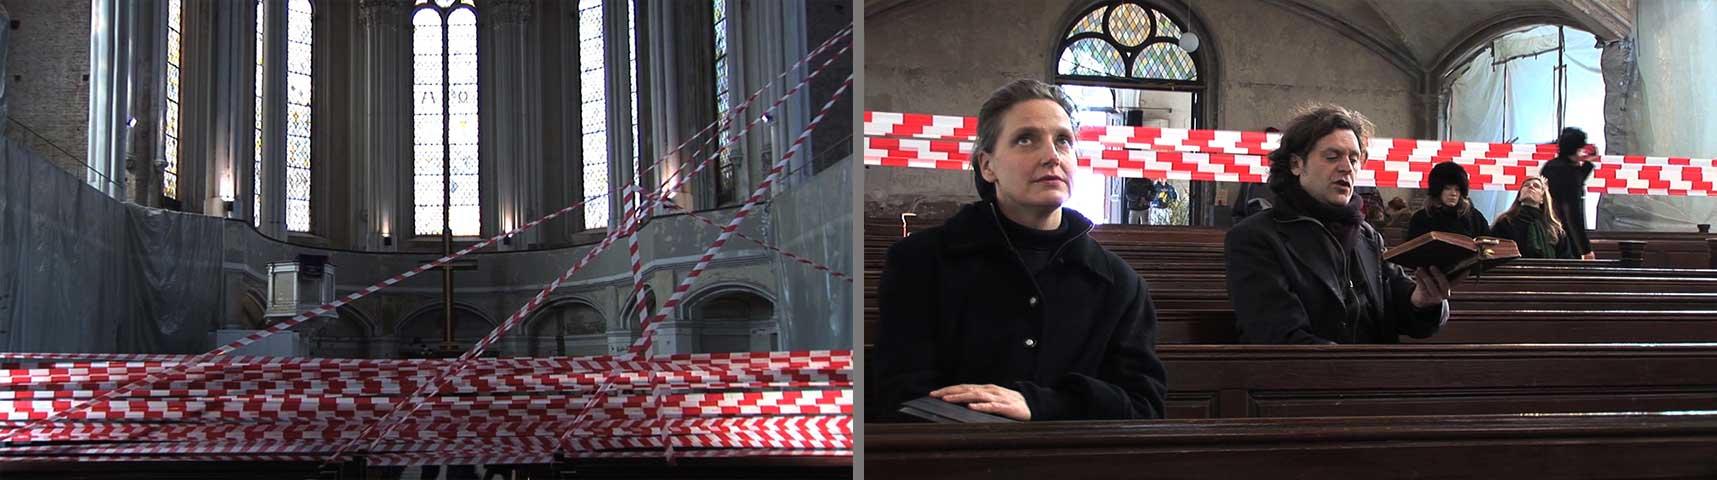 No Exit: A Shahram Entekhabi's artistic, architectural and performative intervention in Zionskirche, Berlin, Germany